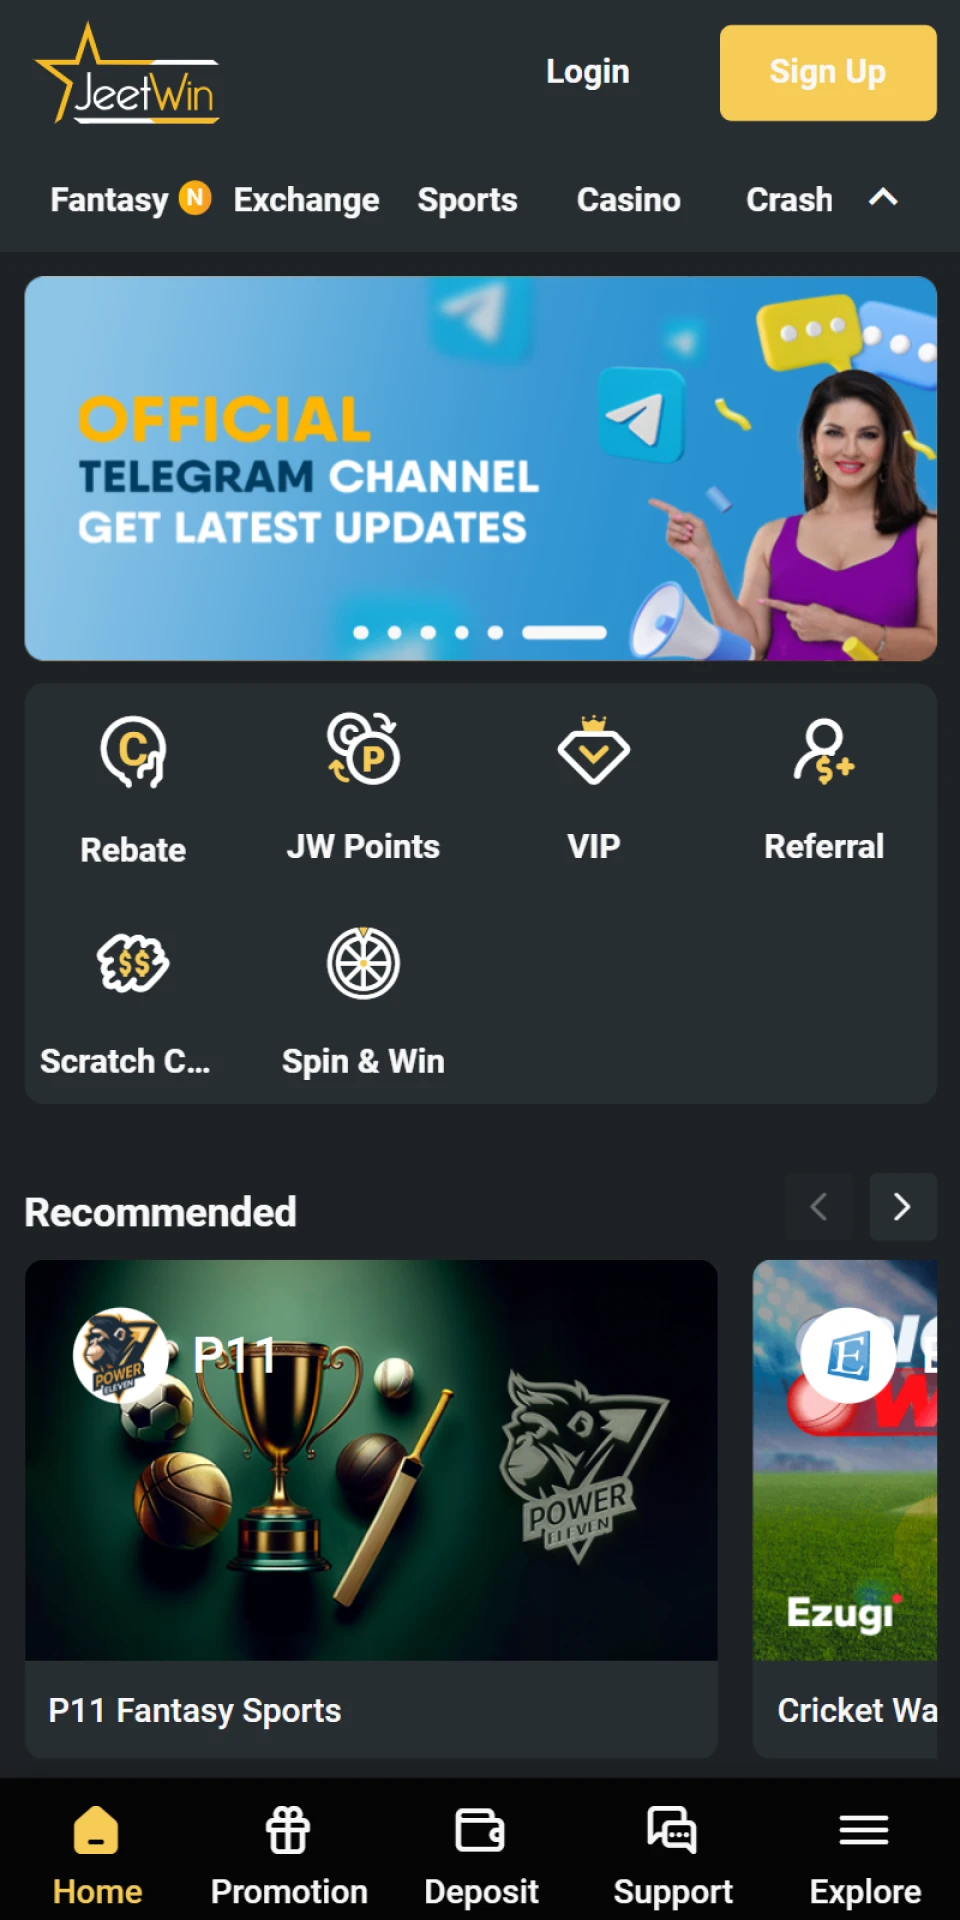 The Jeetwin app has a variety of sports events for betting and casino games.